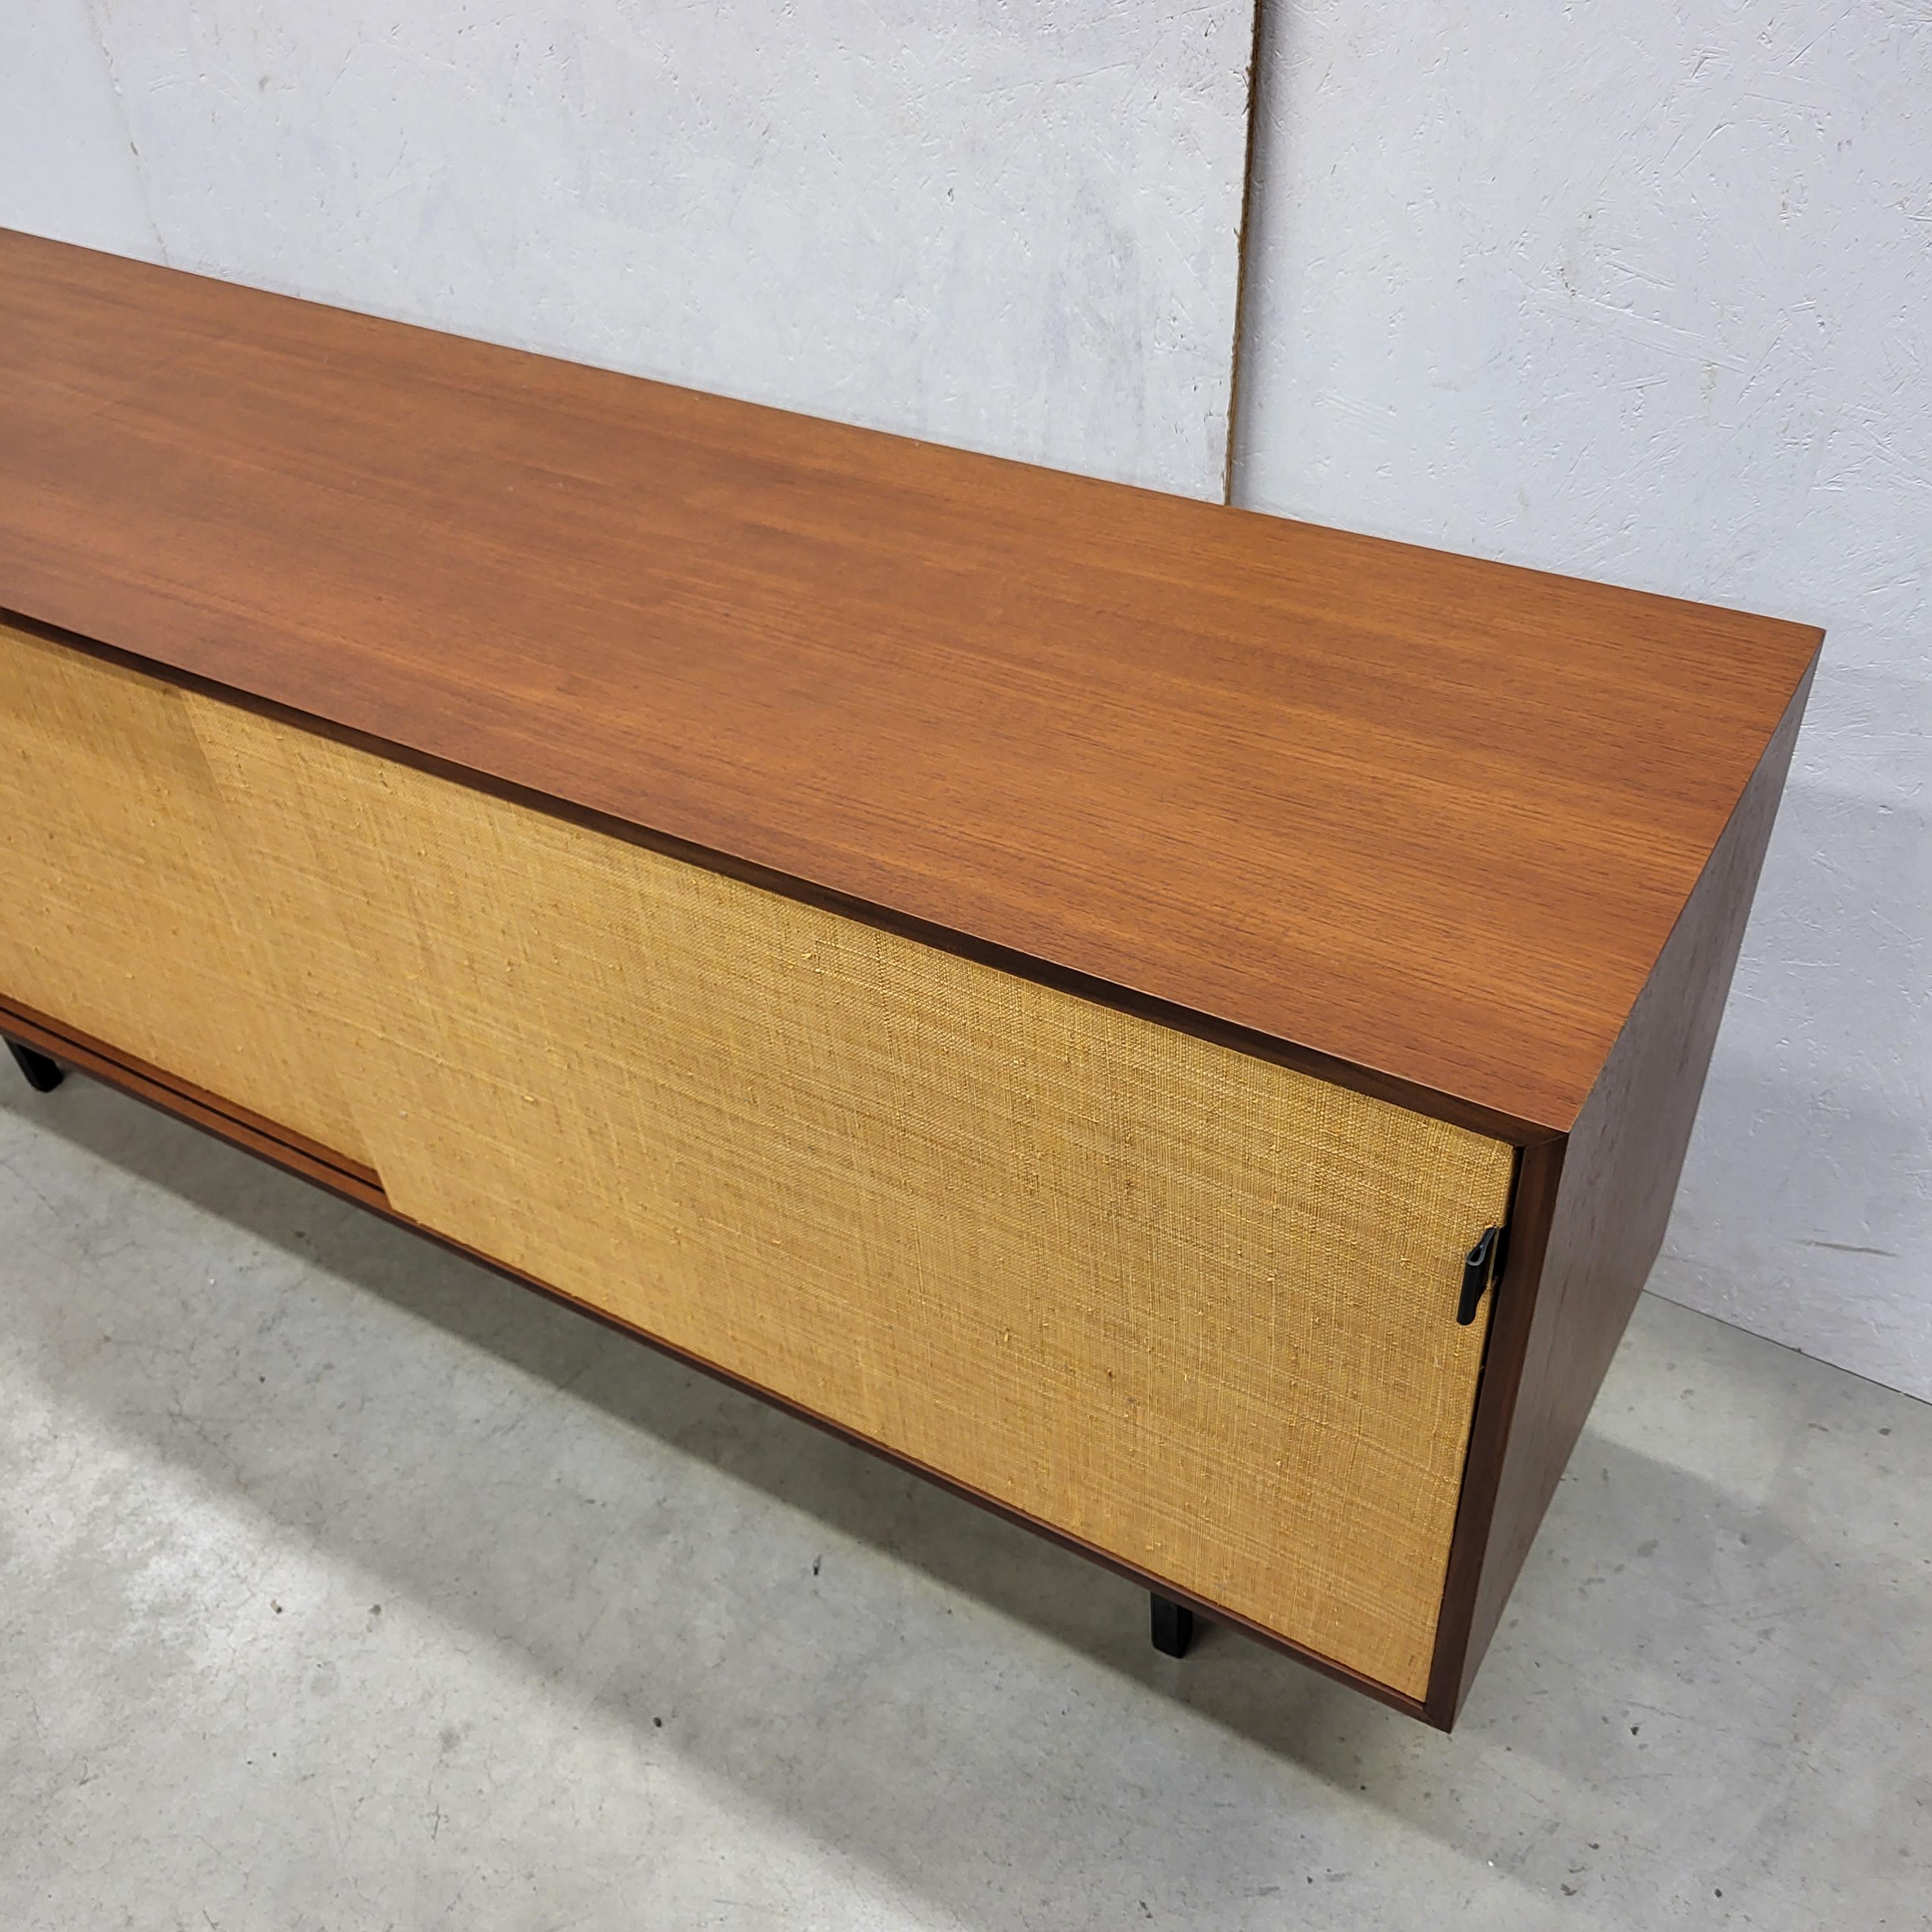 Wood Florence Knoll Seagrass Sideboard Model 116 by Knoll, 1952 For Sale